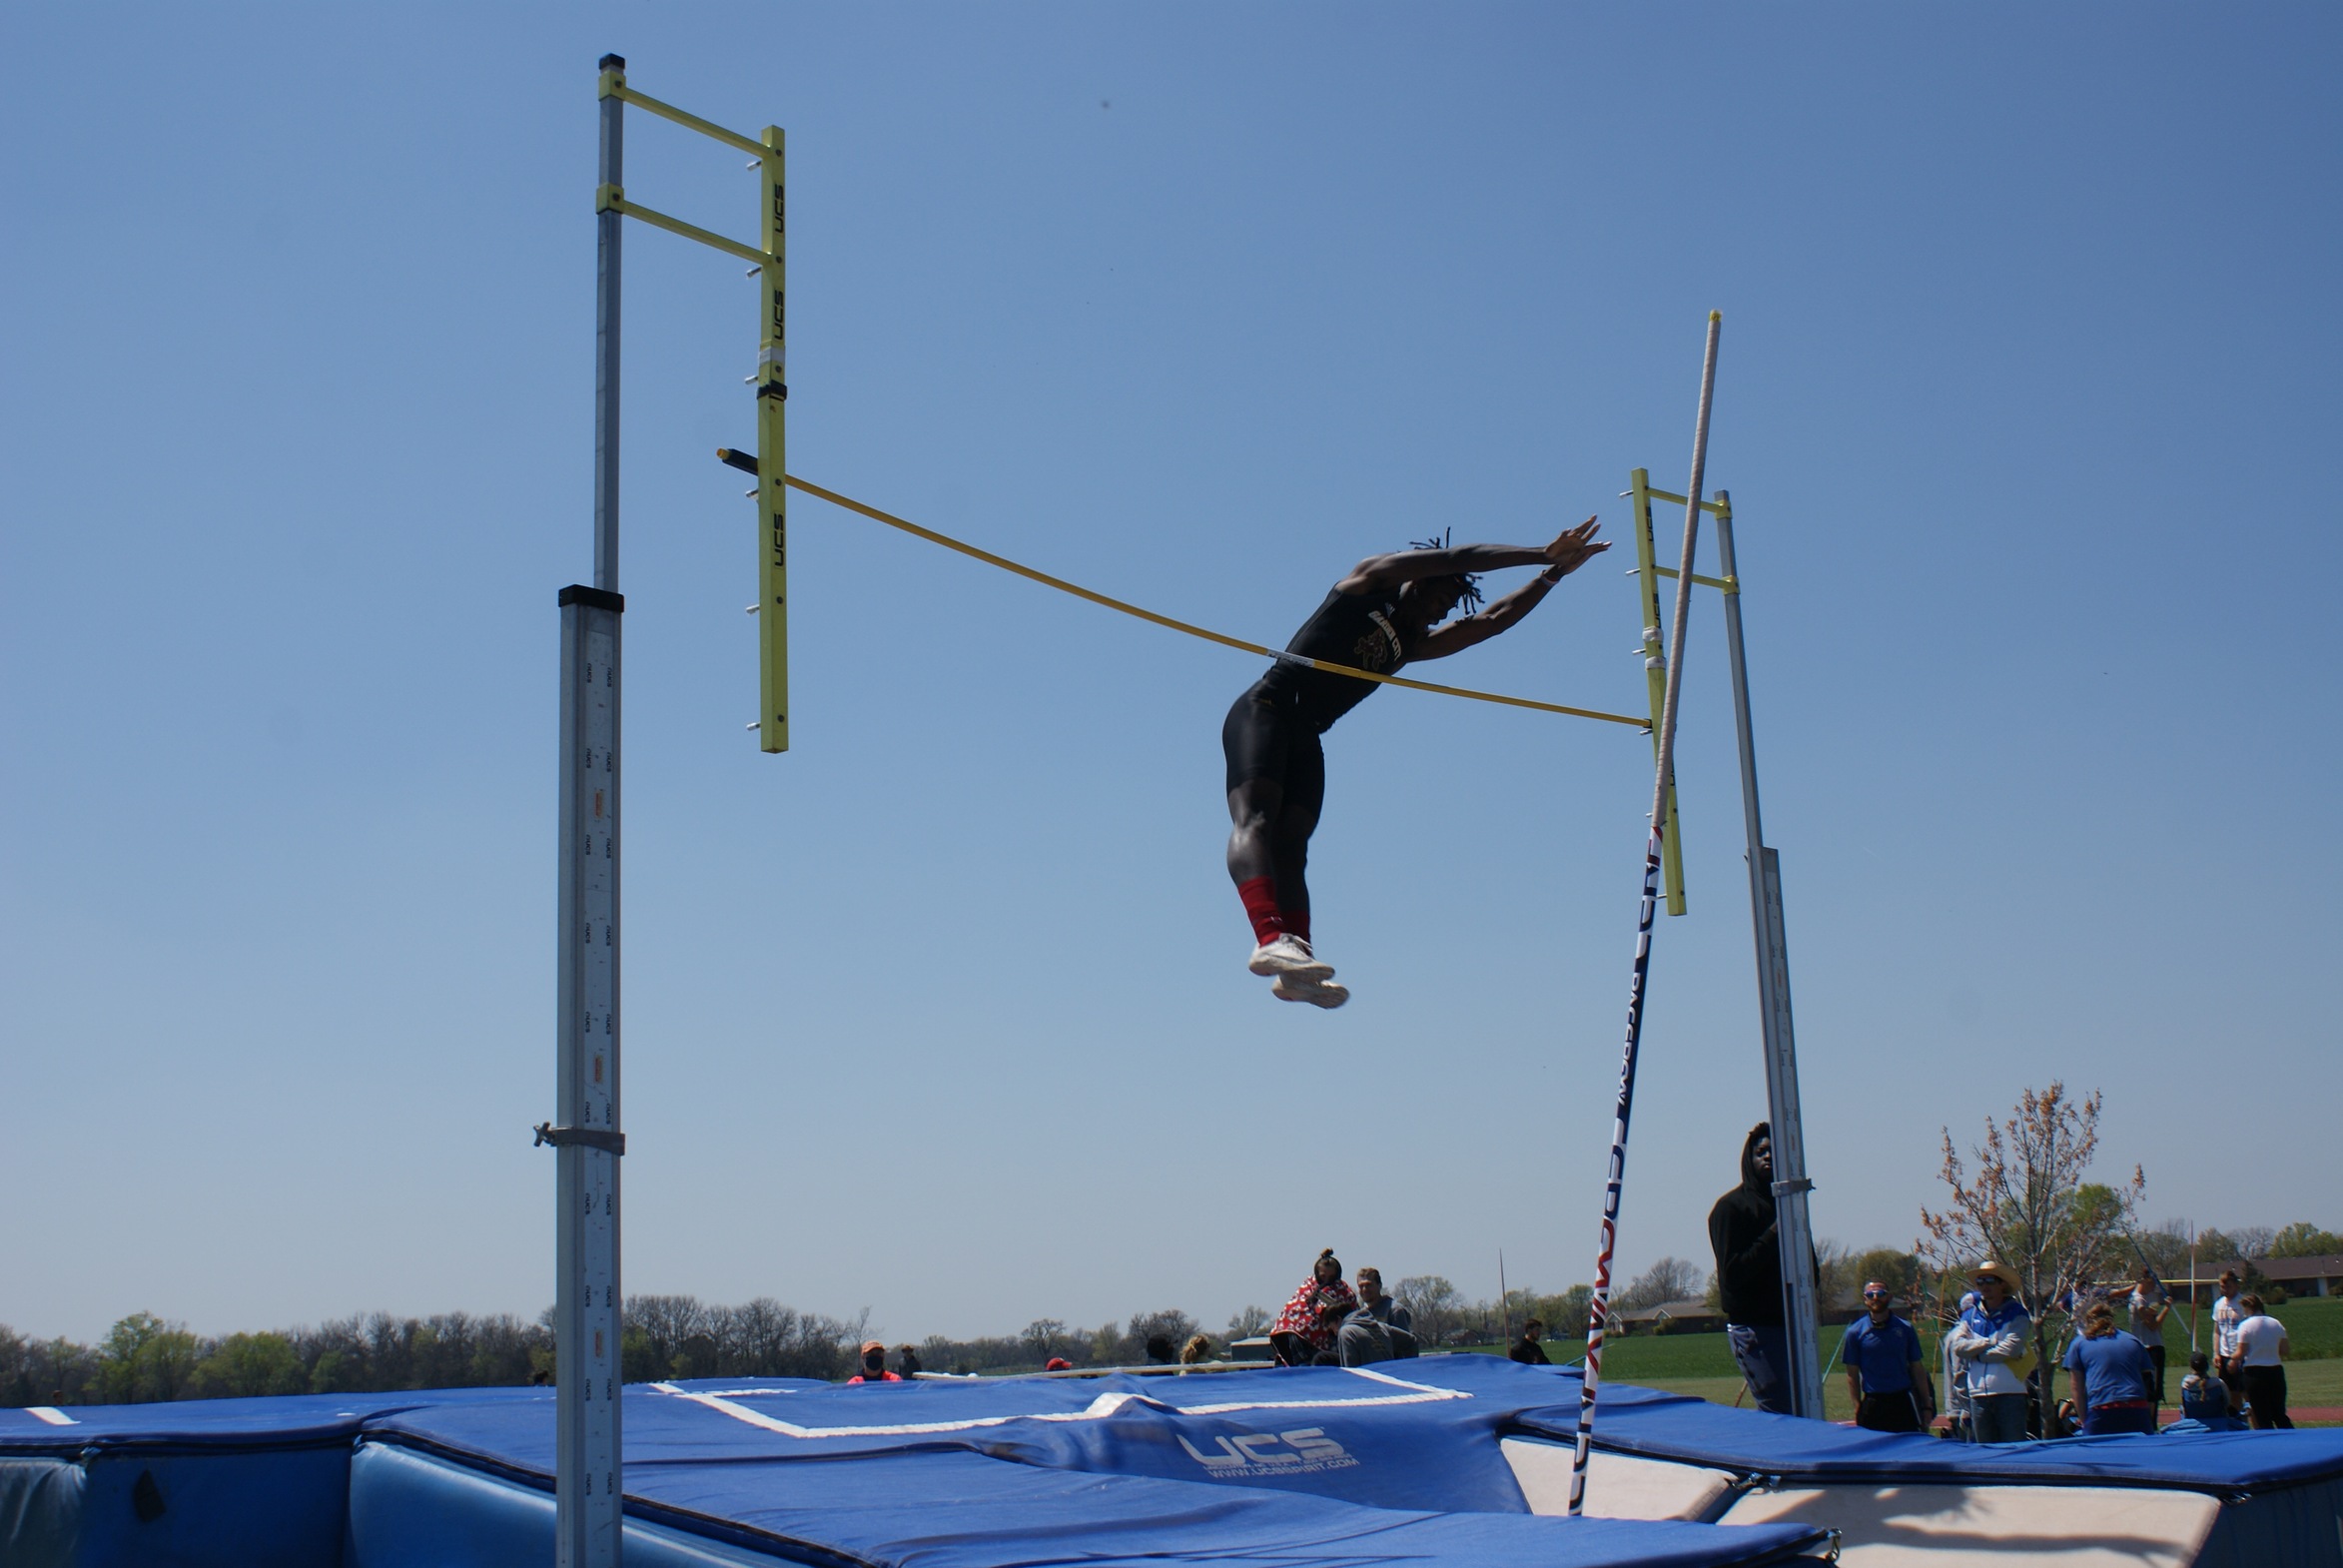 Williams sets school record; Ayala qualifies for nationals at Tabor